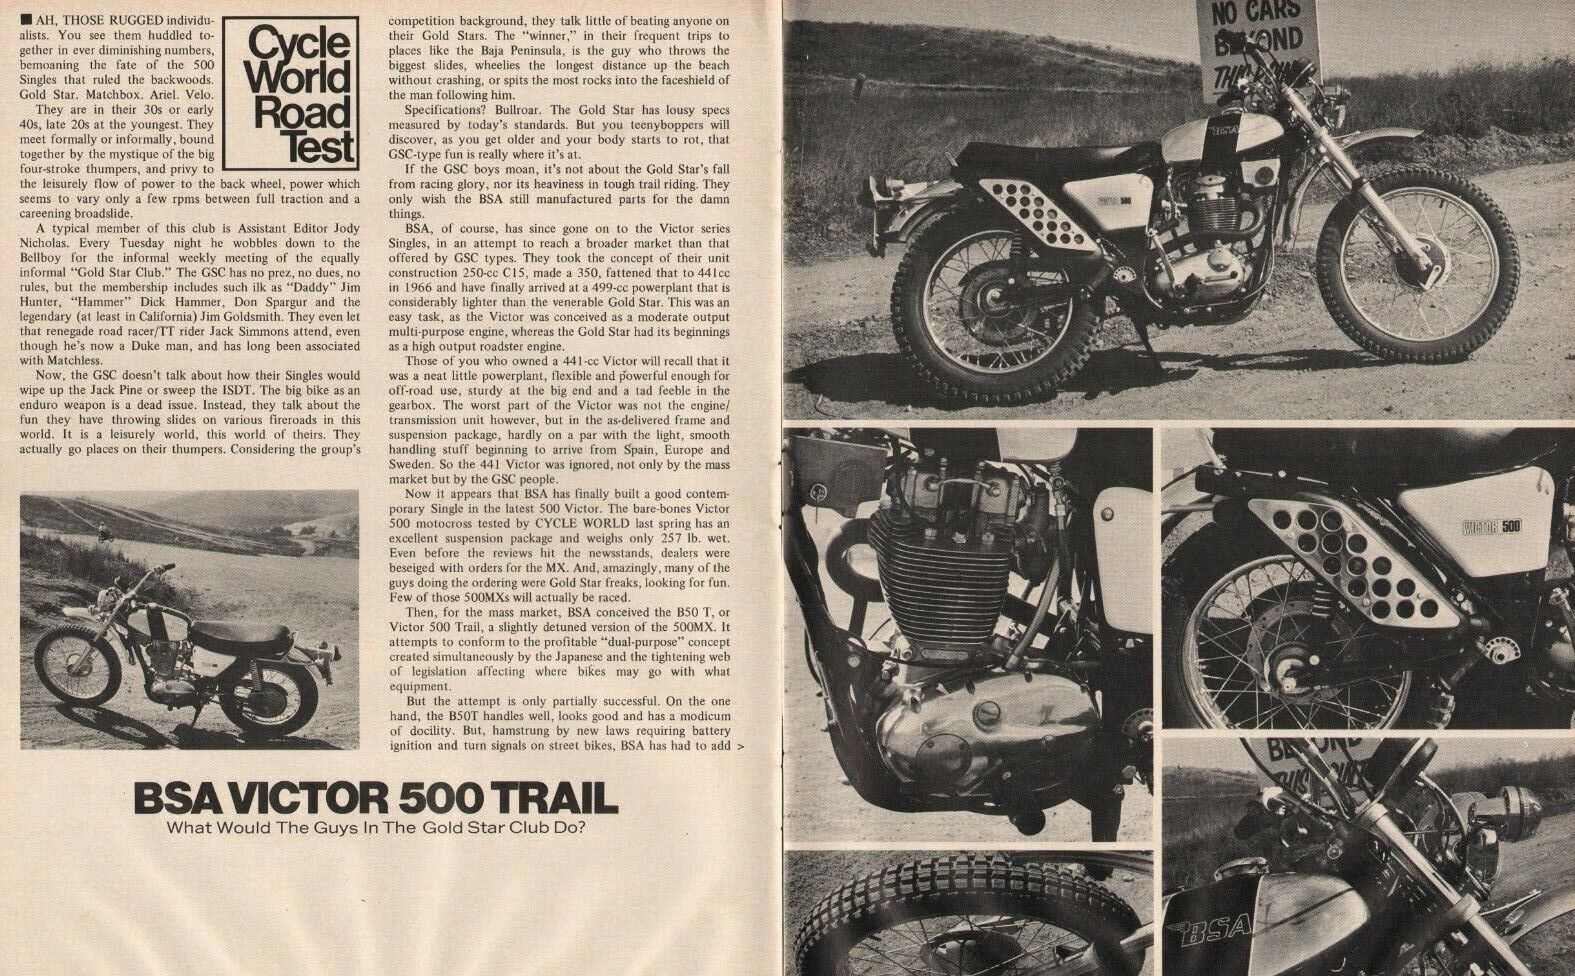 1972 Bsa Victor 500 Trail - 4-page Vintage Motorcycle Road Test Article